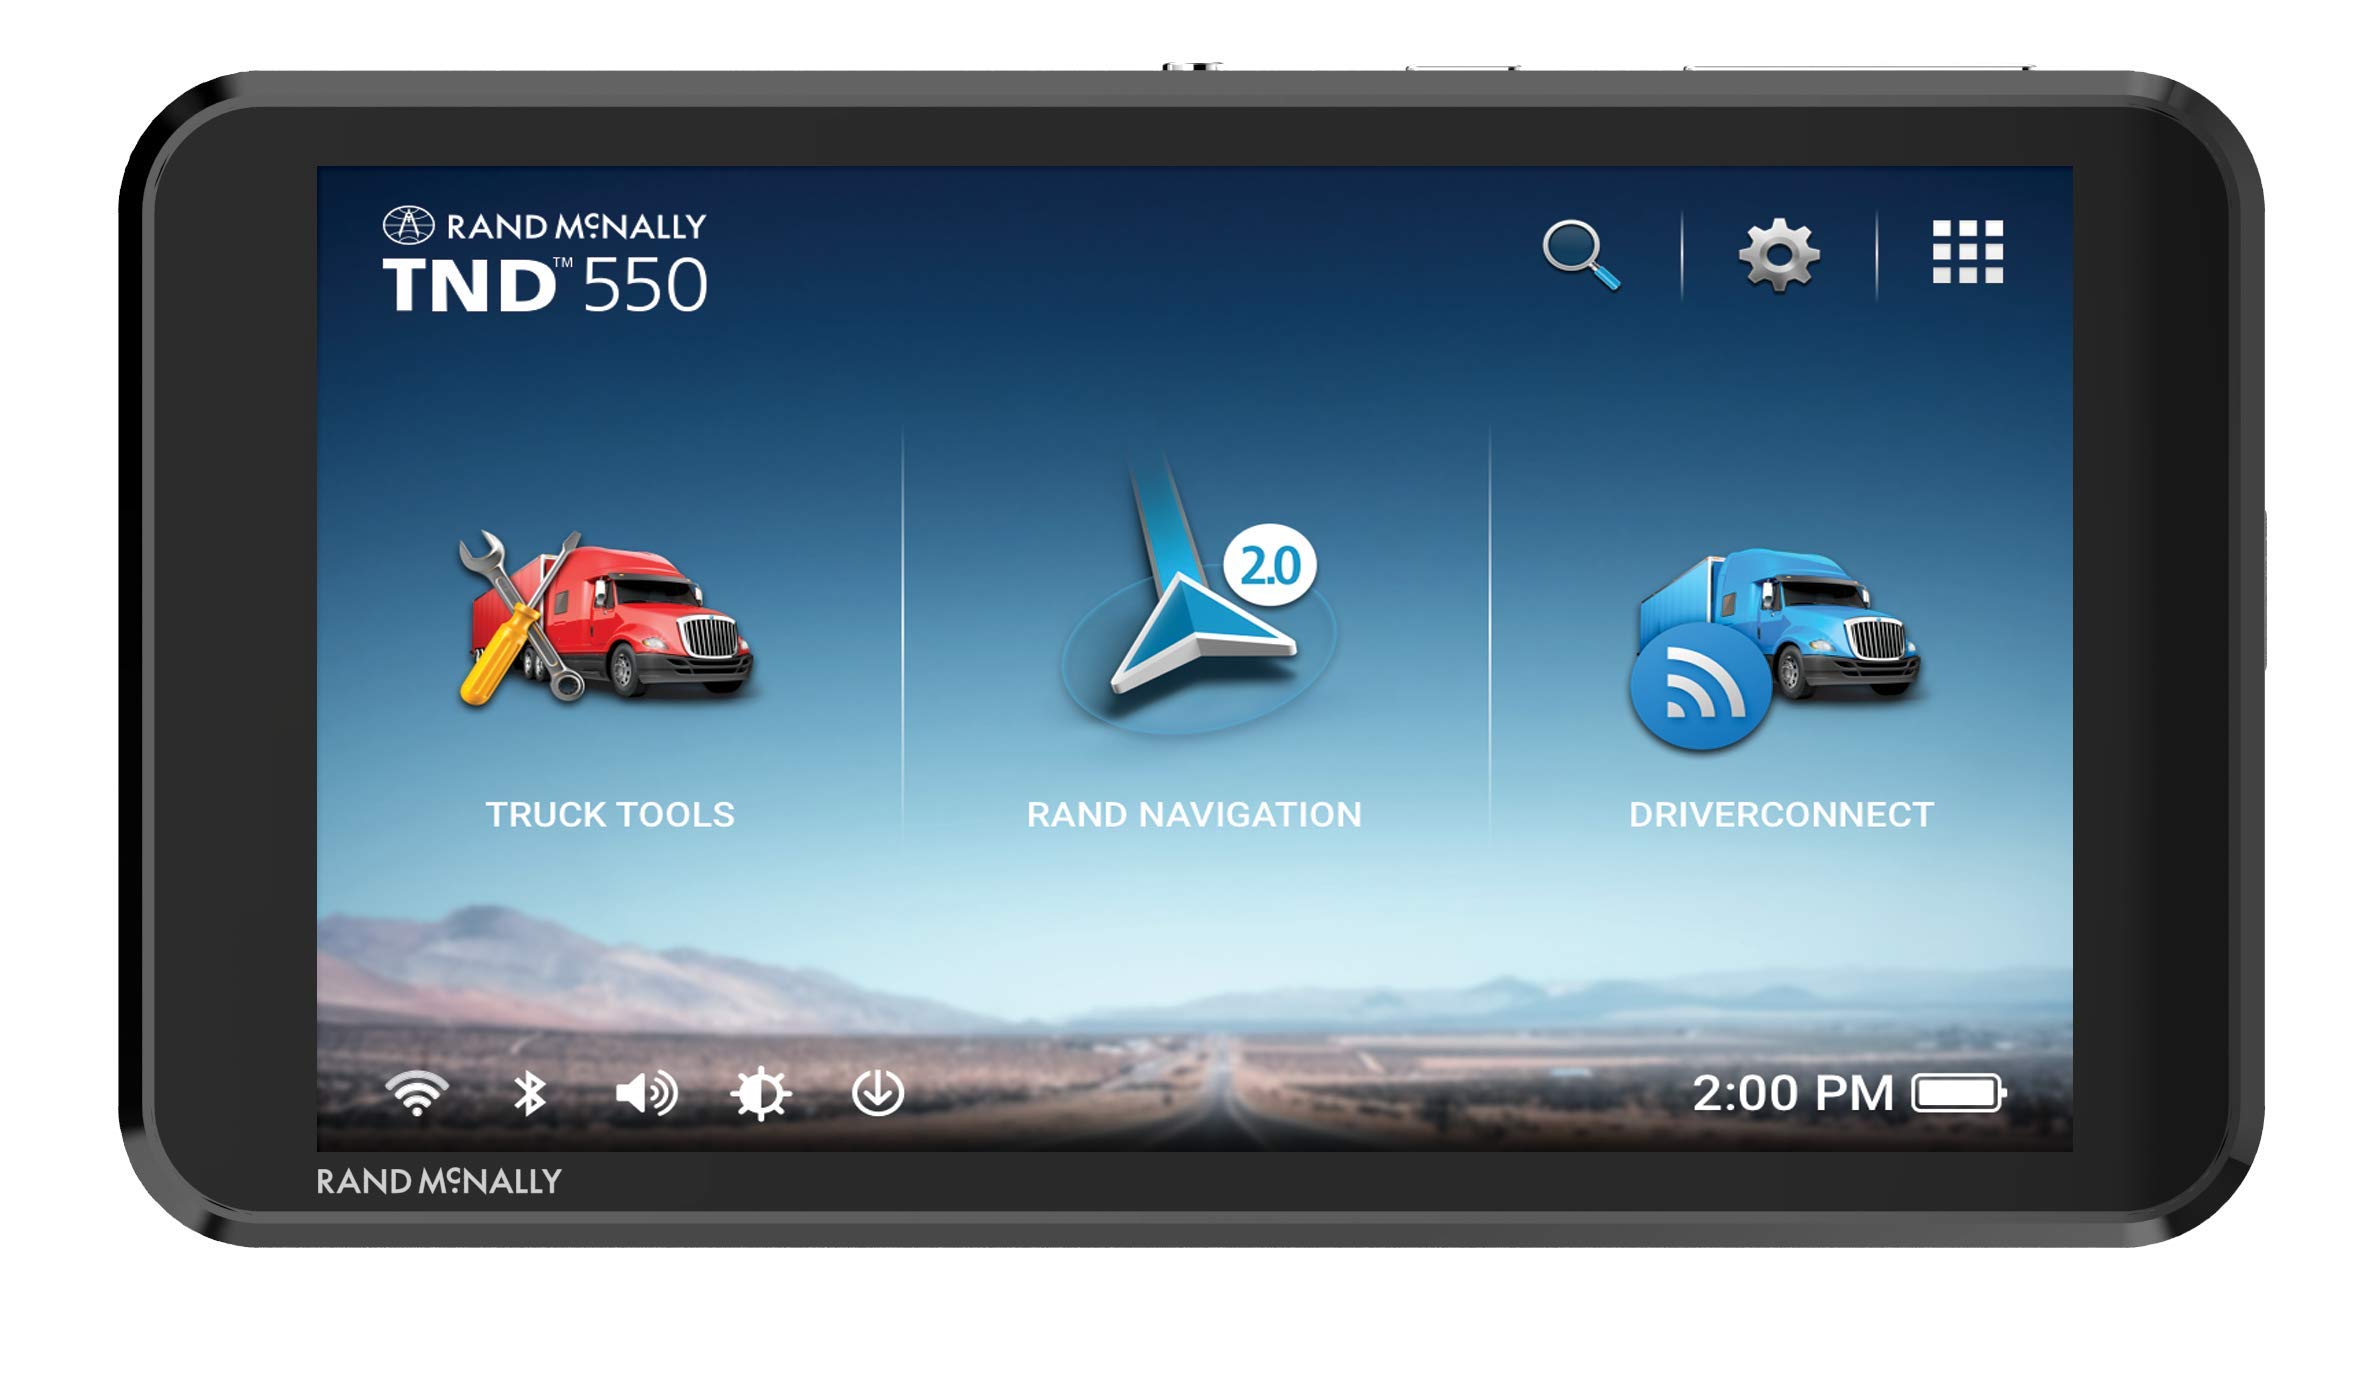 Rand McNally TND 550 5-inch GPS Truck Navigator Easy-to-Read Display Custom Truck Routing and Rand Navigation 2.0